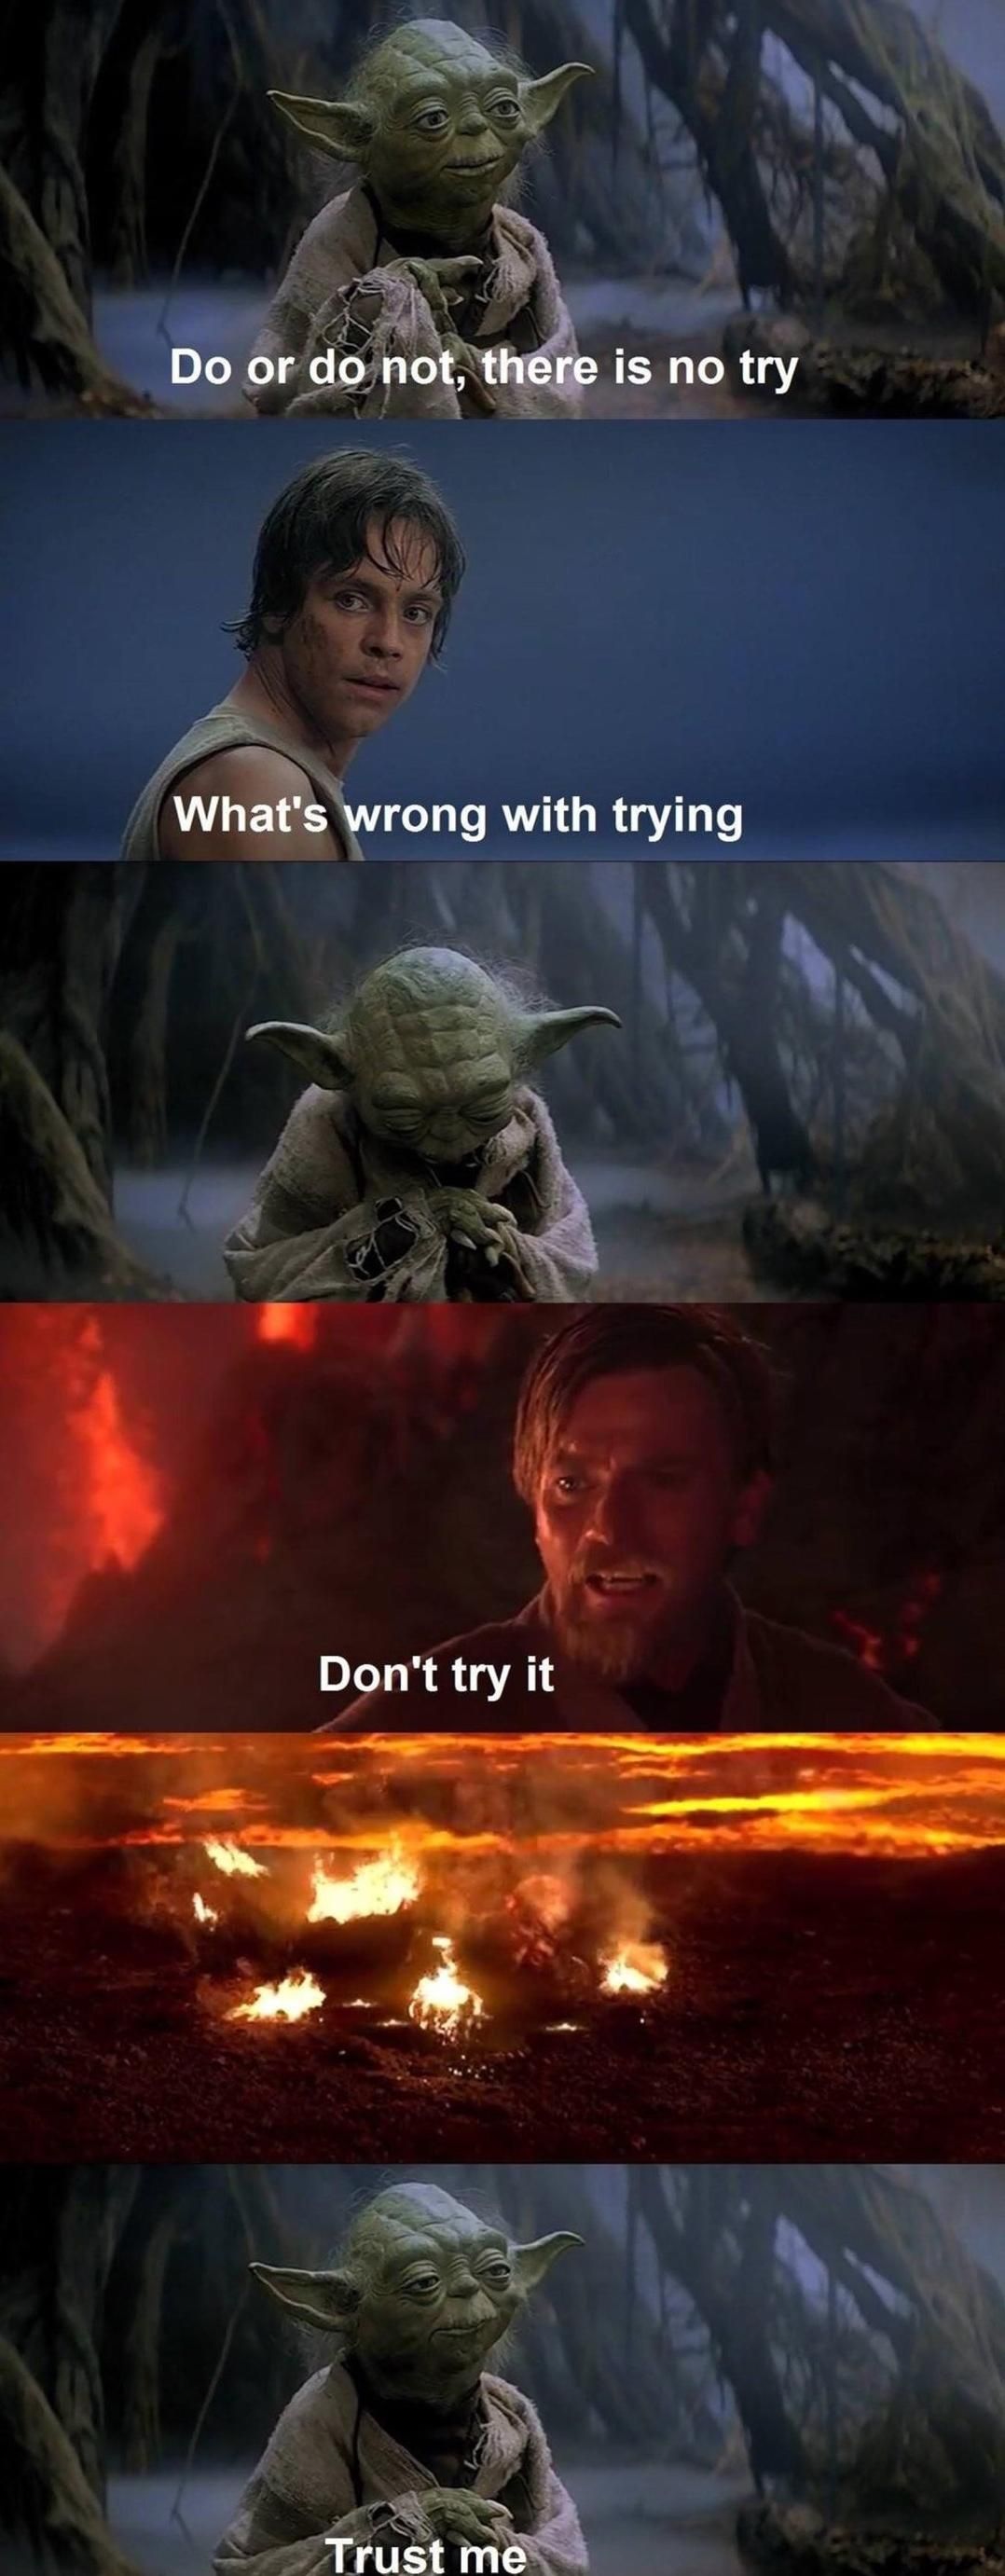 Don't try it